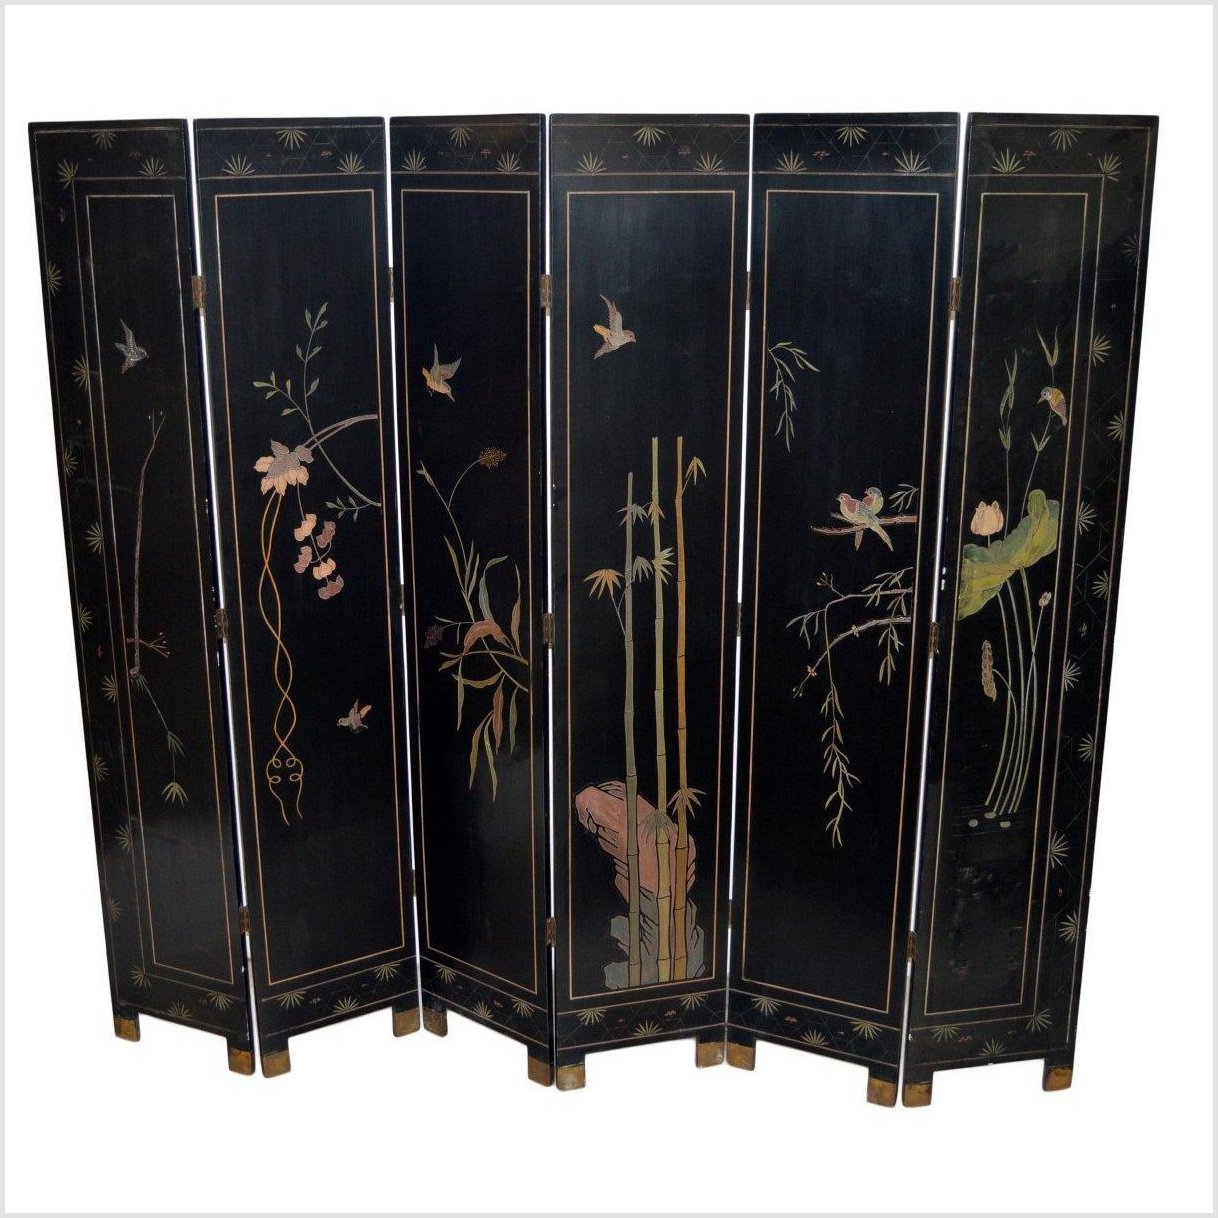 6-Panel Screen Depicting Cranes in Gold, Jade and Black Tones-YN2789-13. Asian & Chinese Furniture, Art, Antiques, Vintage Home Décor for sale at FEA Home